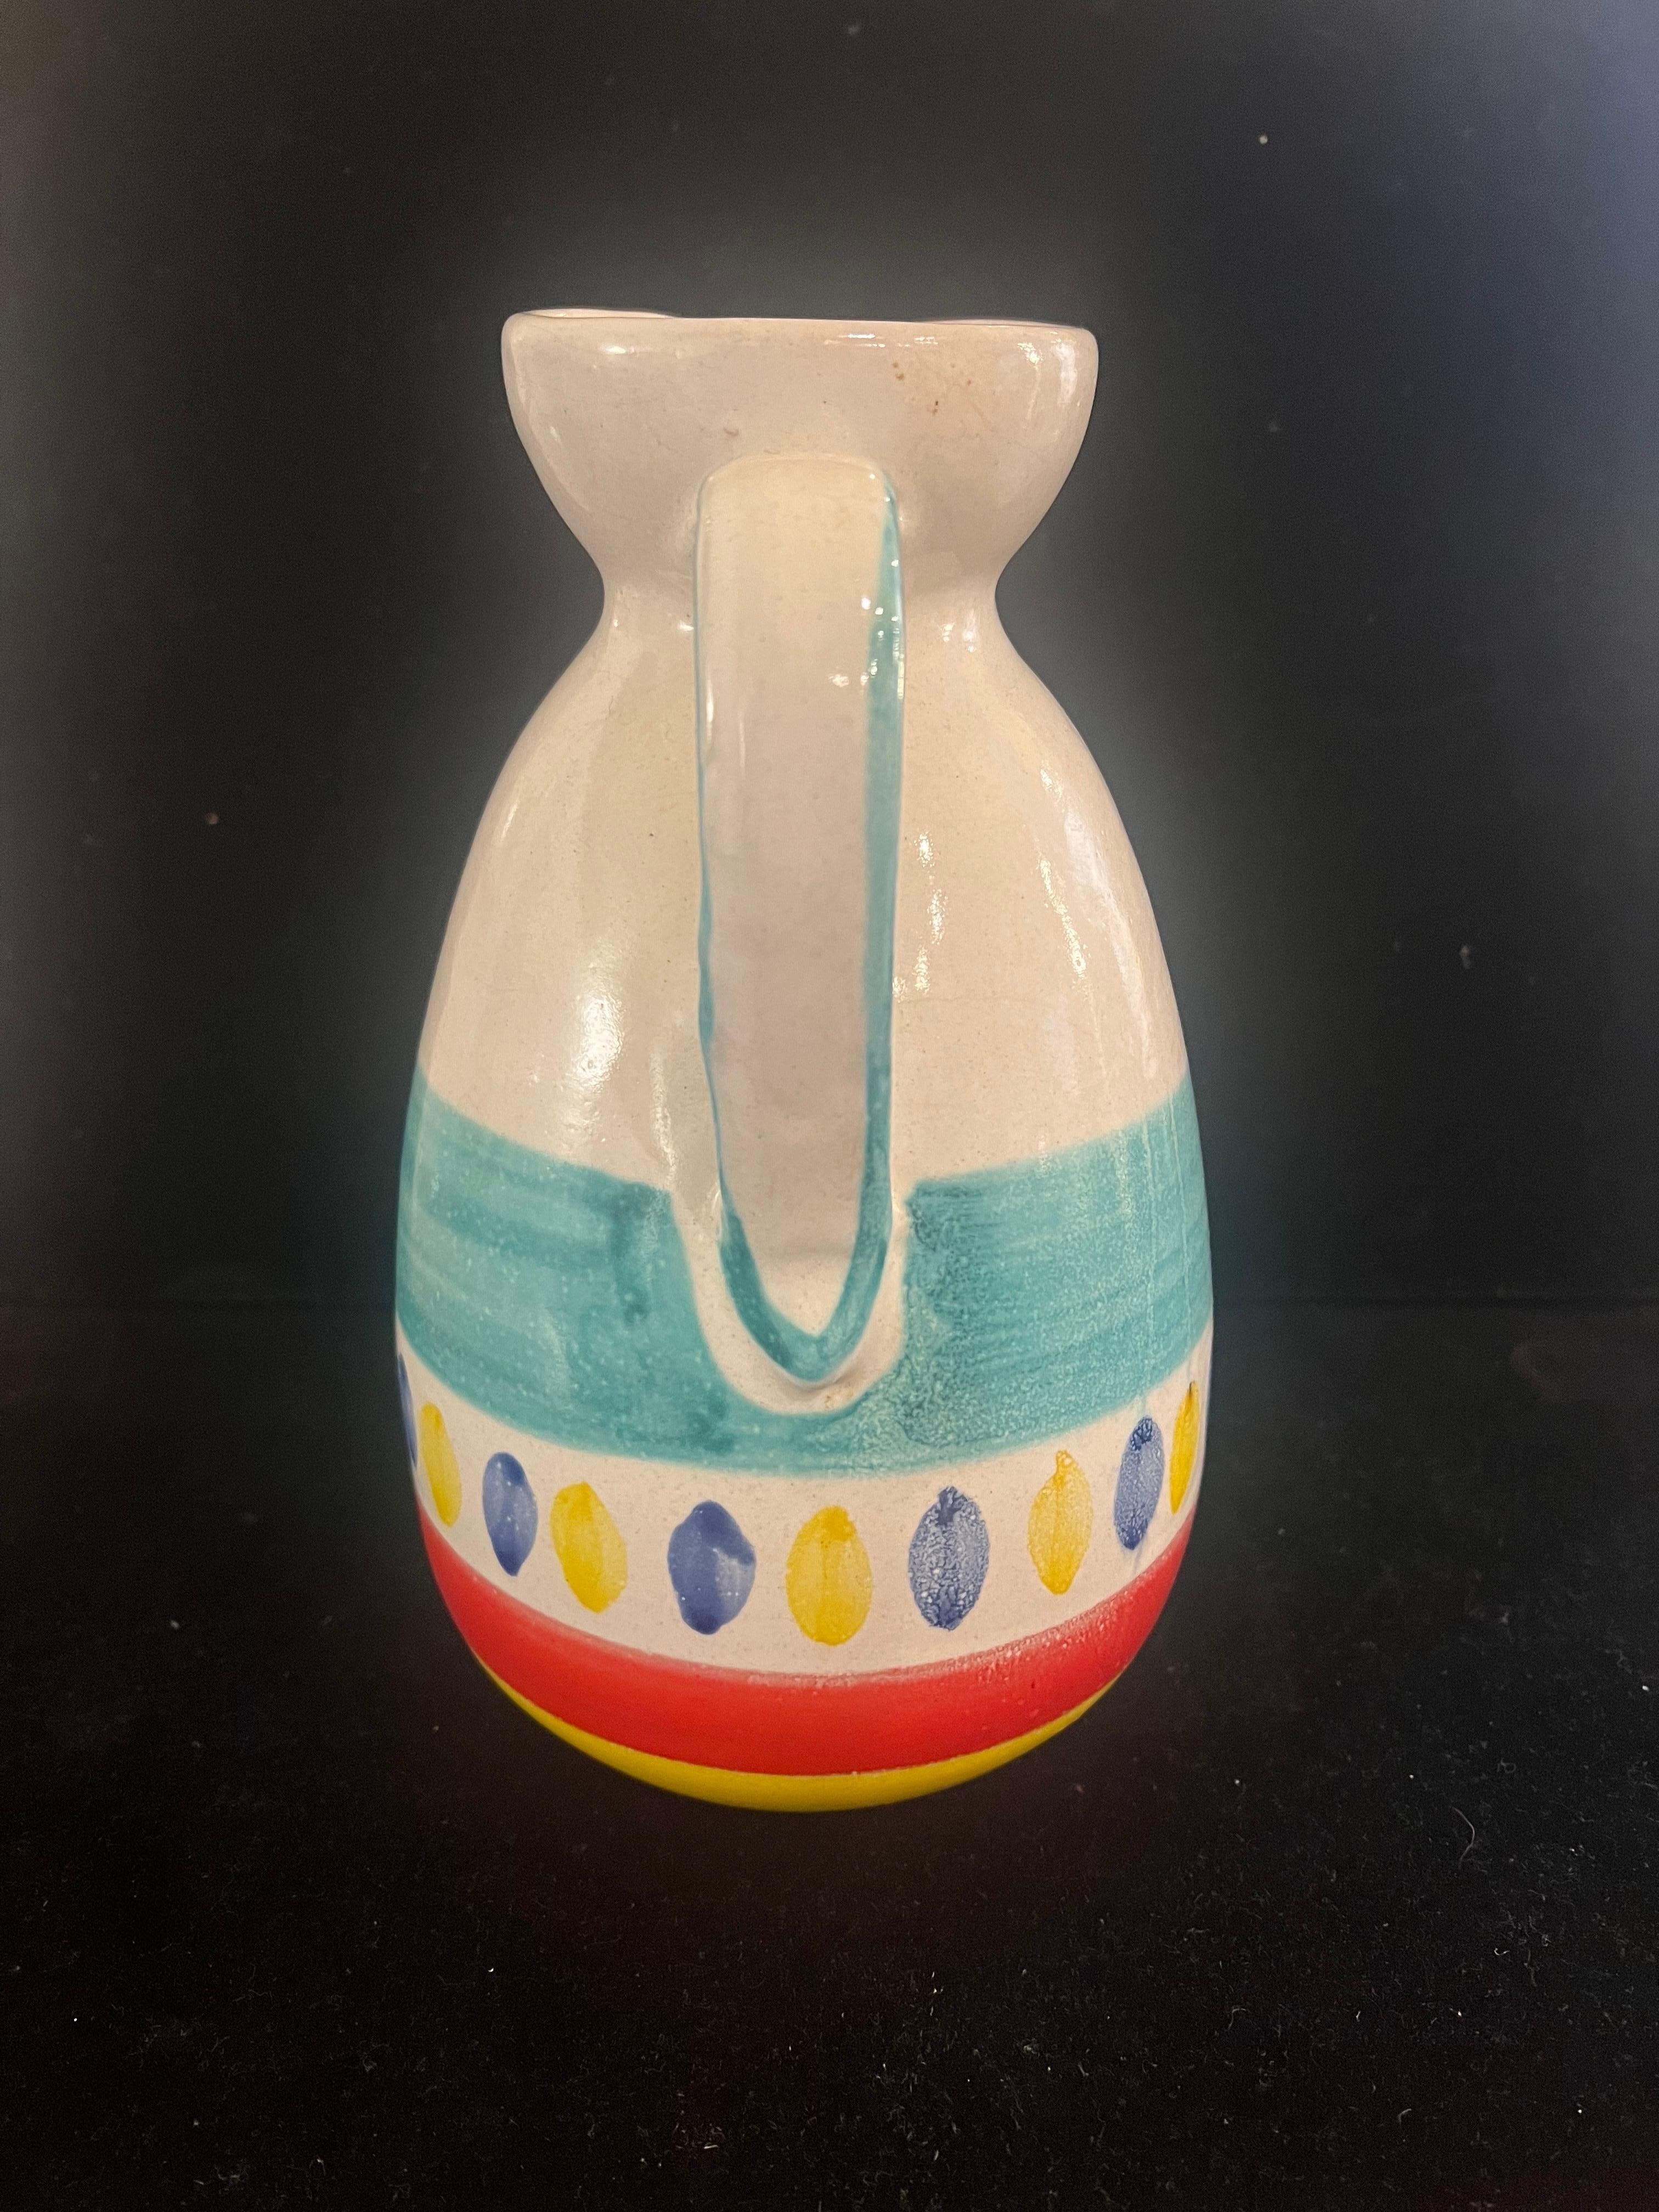 Italian Hand-Painted Ceramic Water RareJug by Giovanni Desimone With Sangria Recipe For Sale